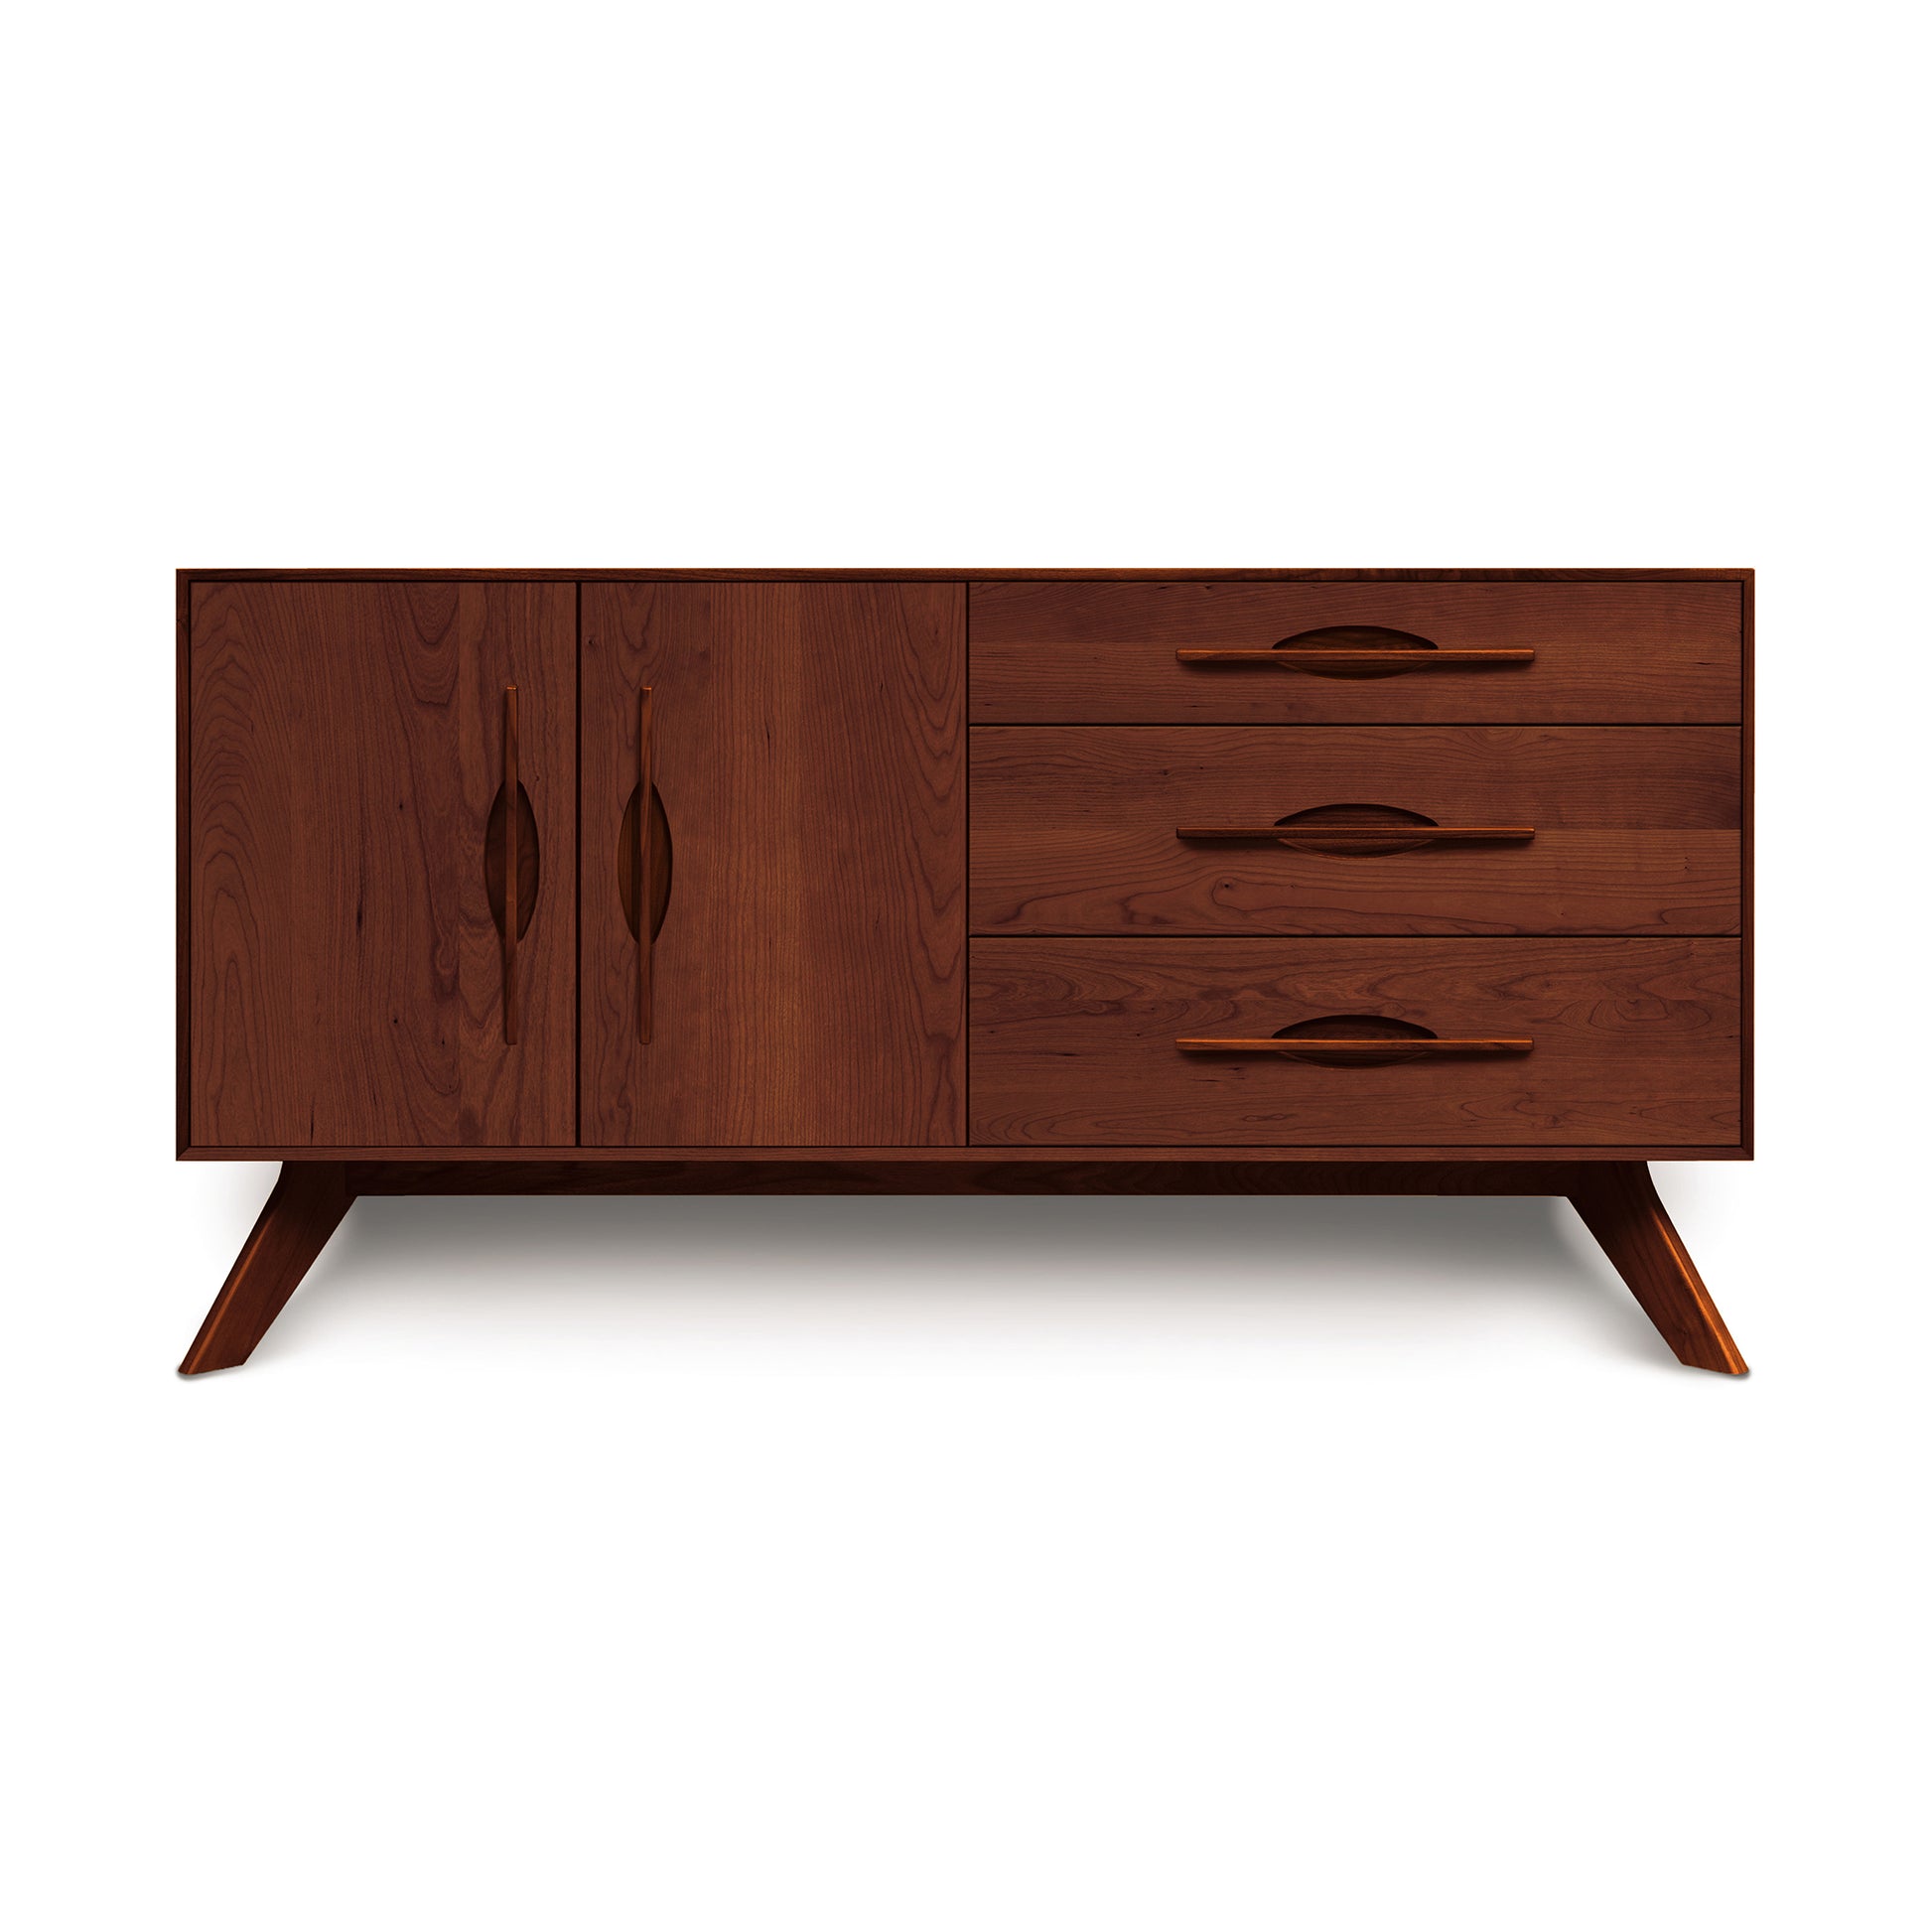 A mid-century modern style wooden sideboard with tapered legs, featuring two doors and three drawers with integrated handle cutouts, isolated on a white background. - The Audrey 2-Door 3-Drawer Buffet by Copeland Furniture